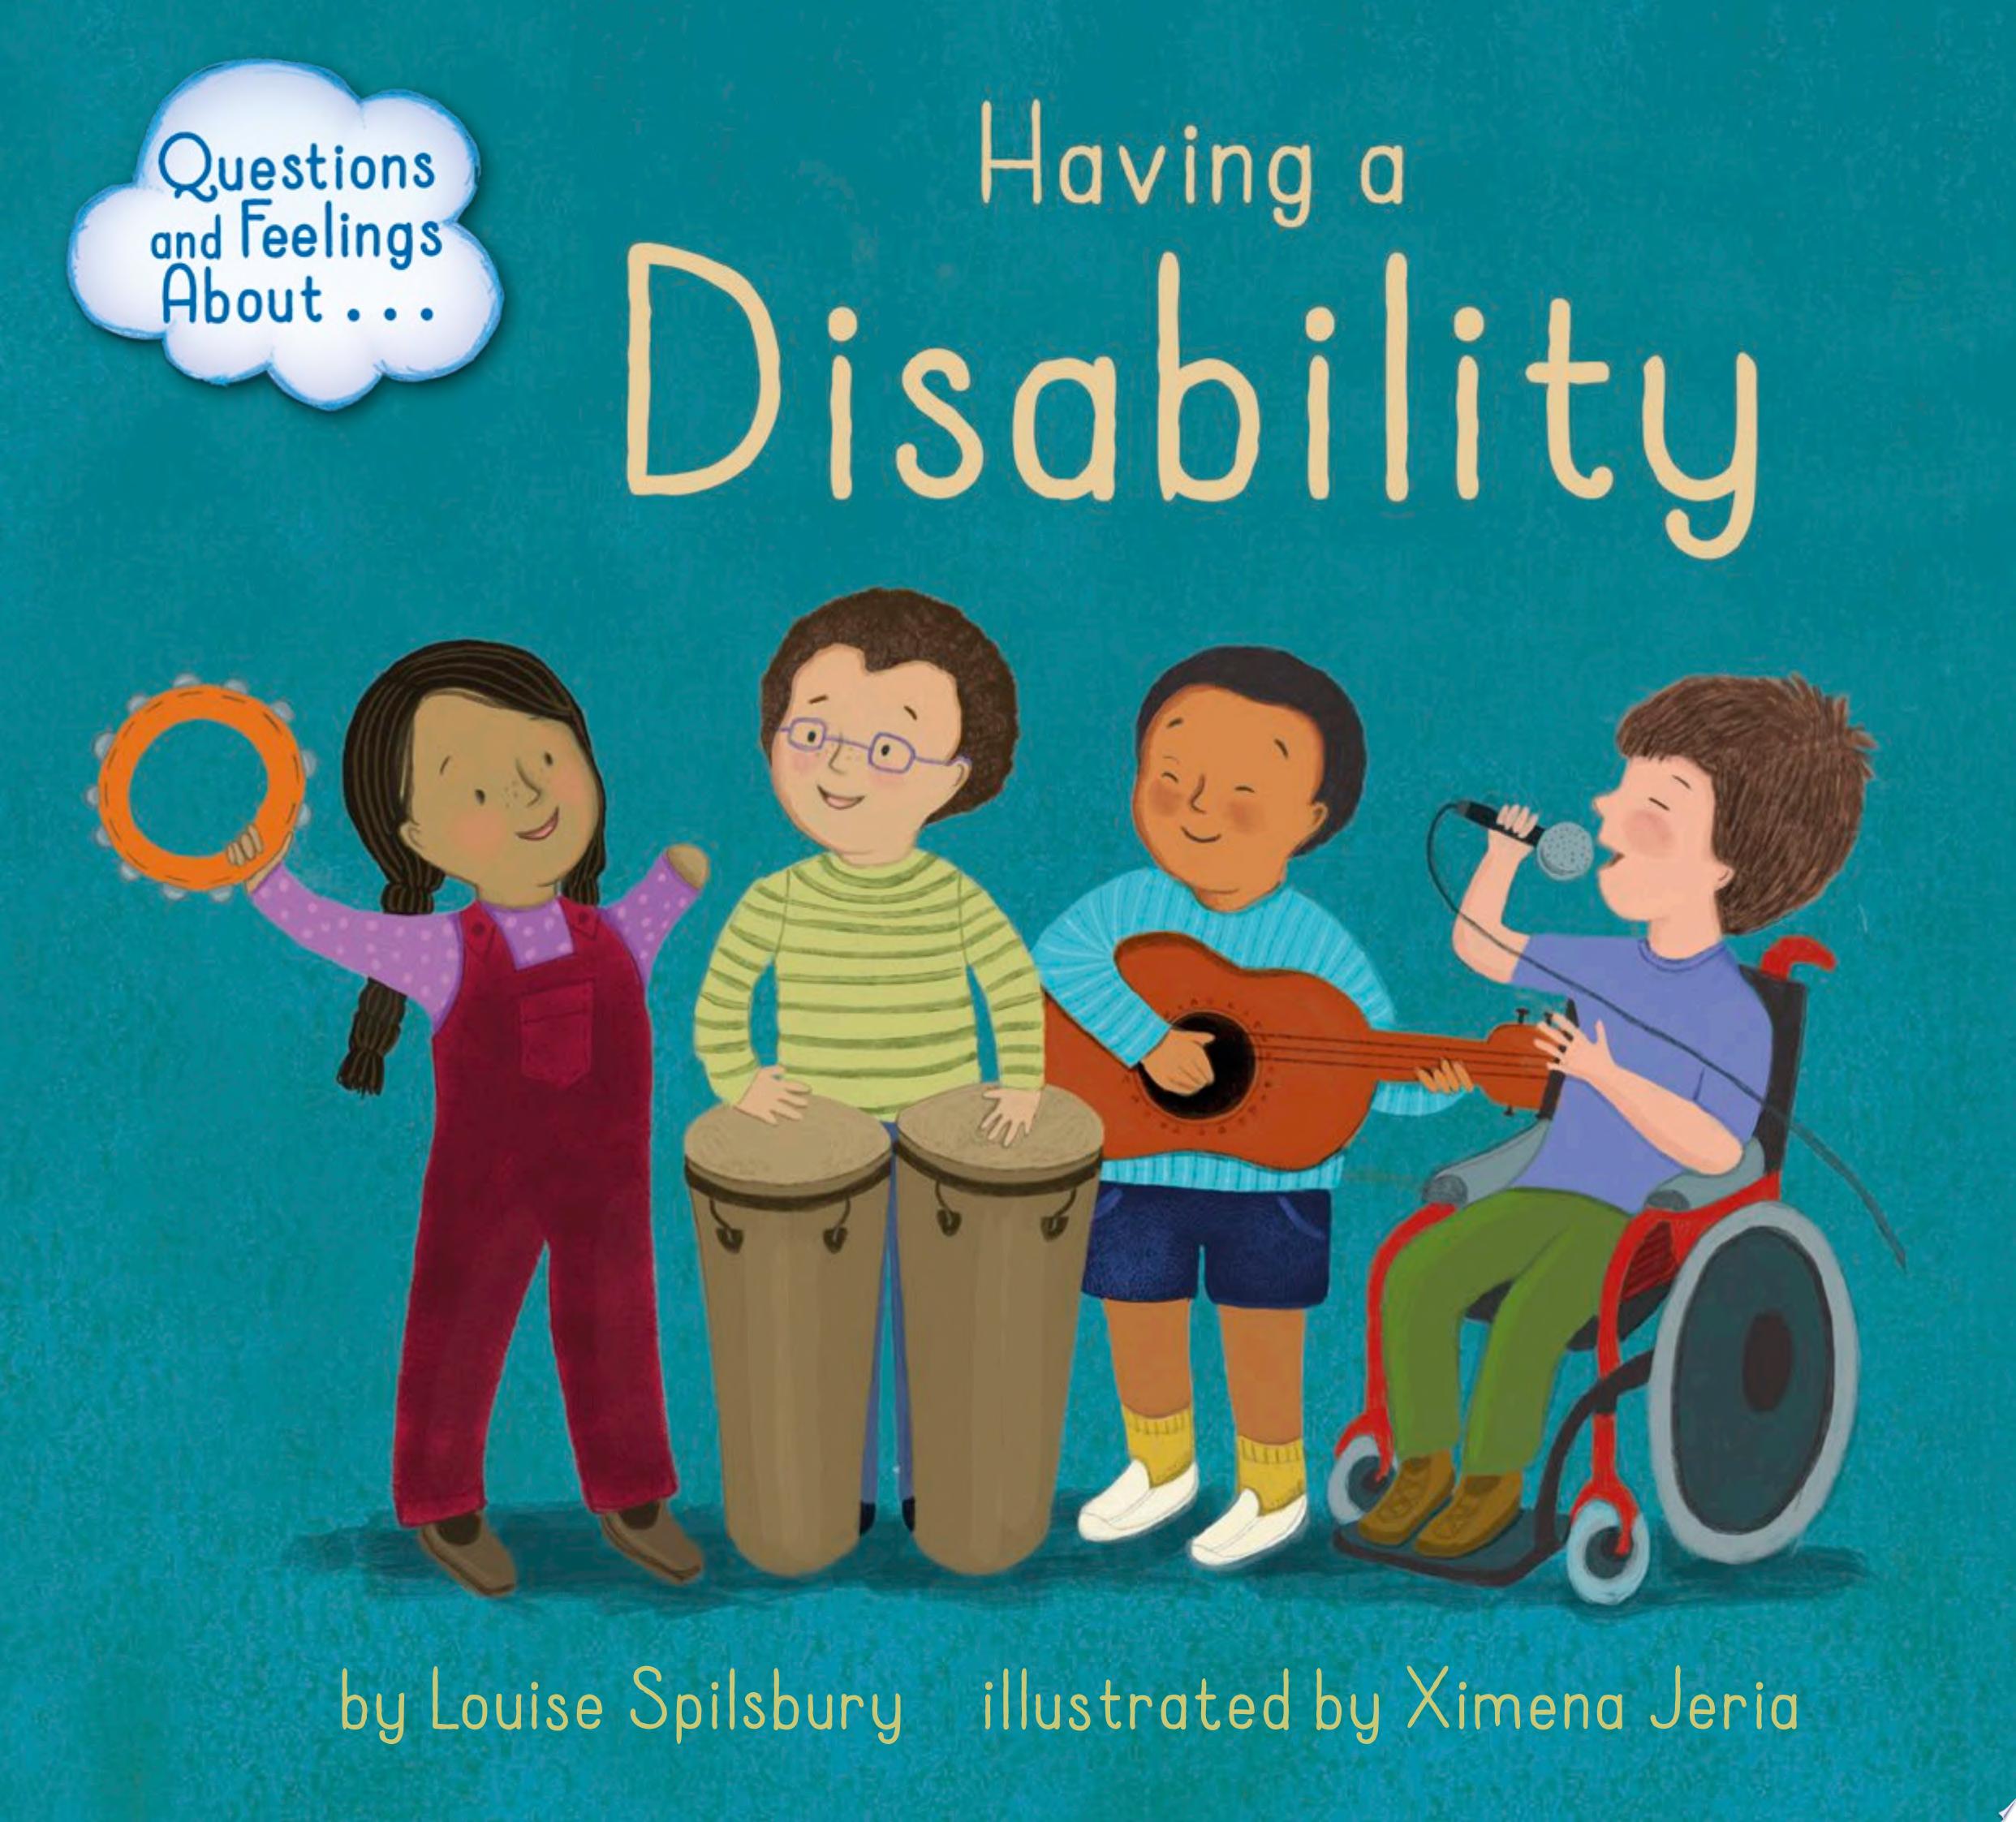 Image for "Questions and Feelings About Having a Disability"